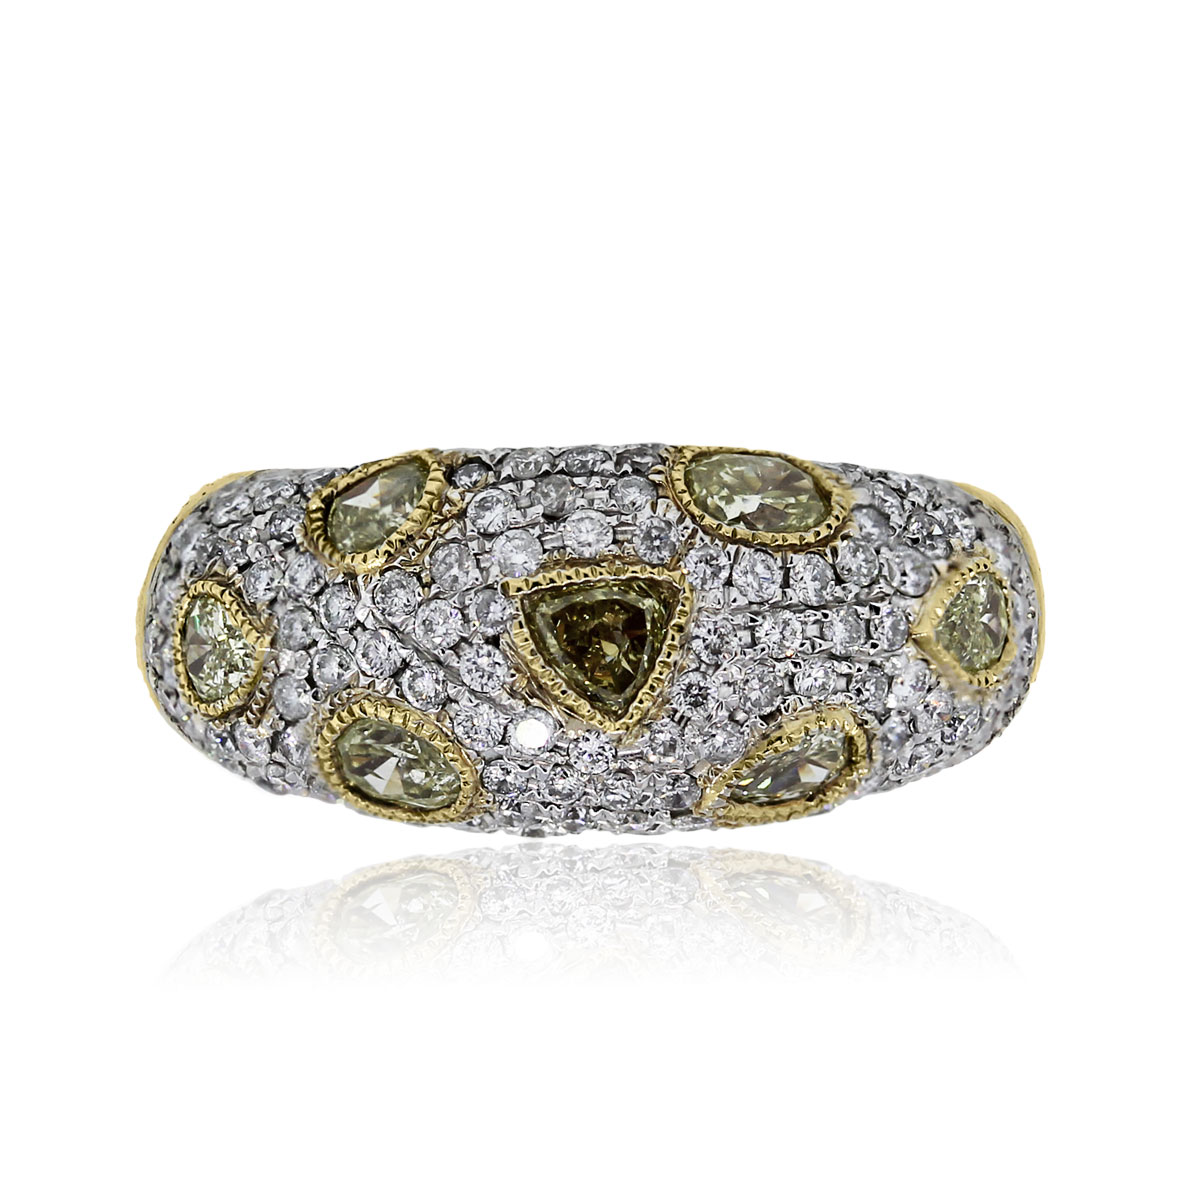 You are viewing this 18k Yellow Gold White & Yellow Diamond Ring!